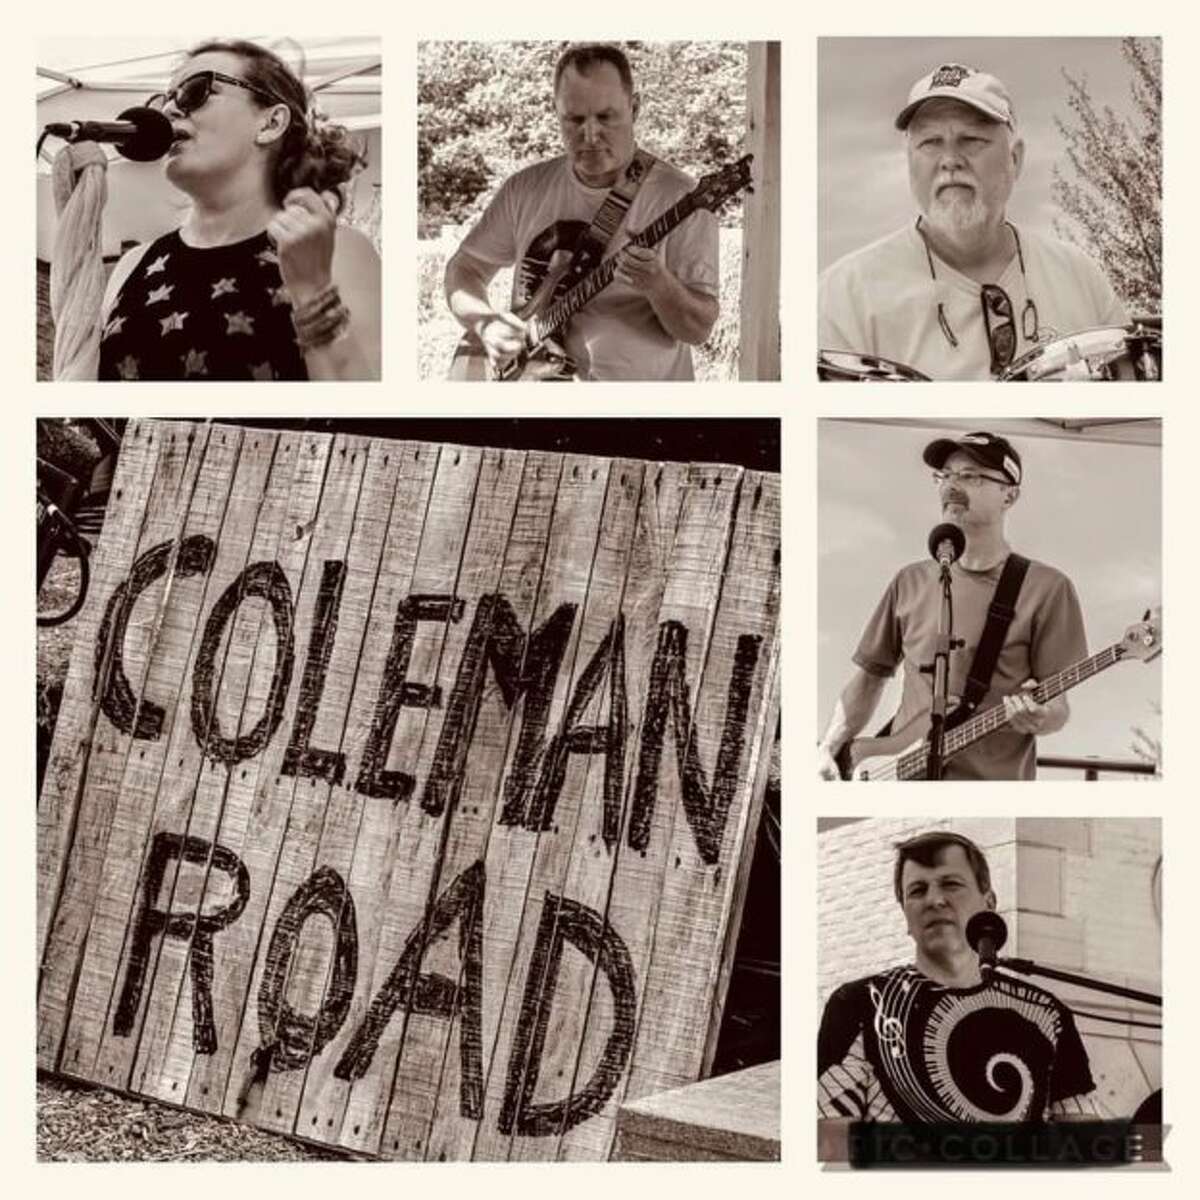 The Coleman Road Band will perform on July 19, 2022 at Northwood University in Midland.